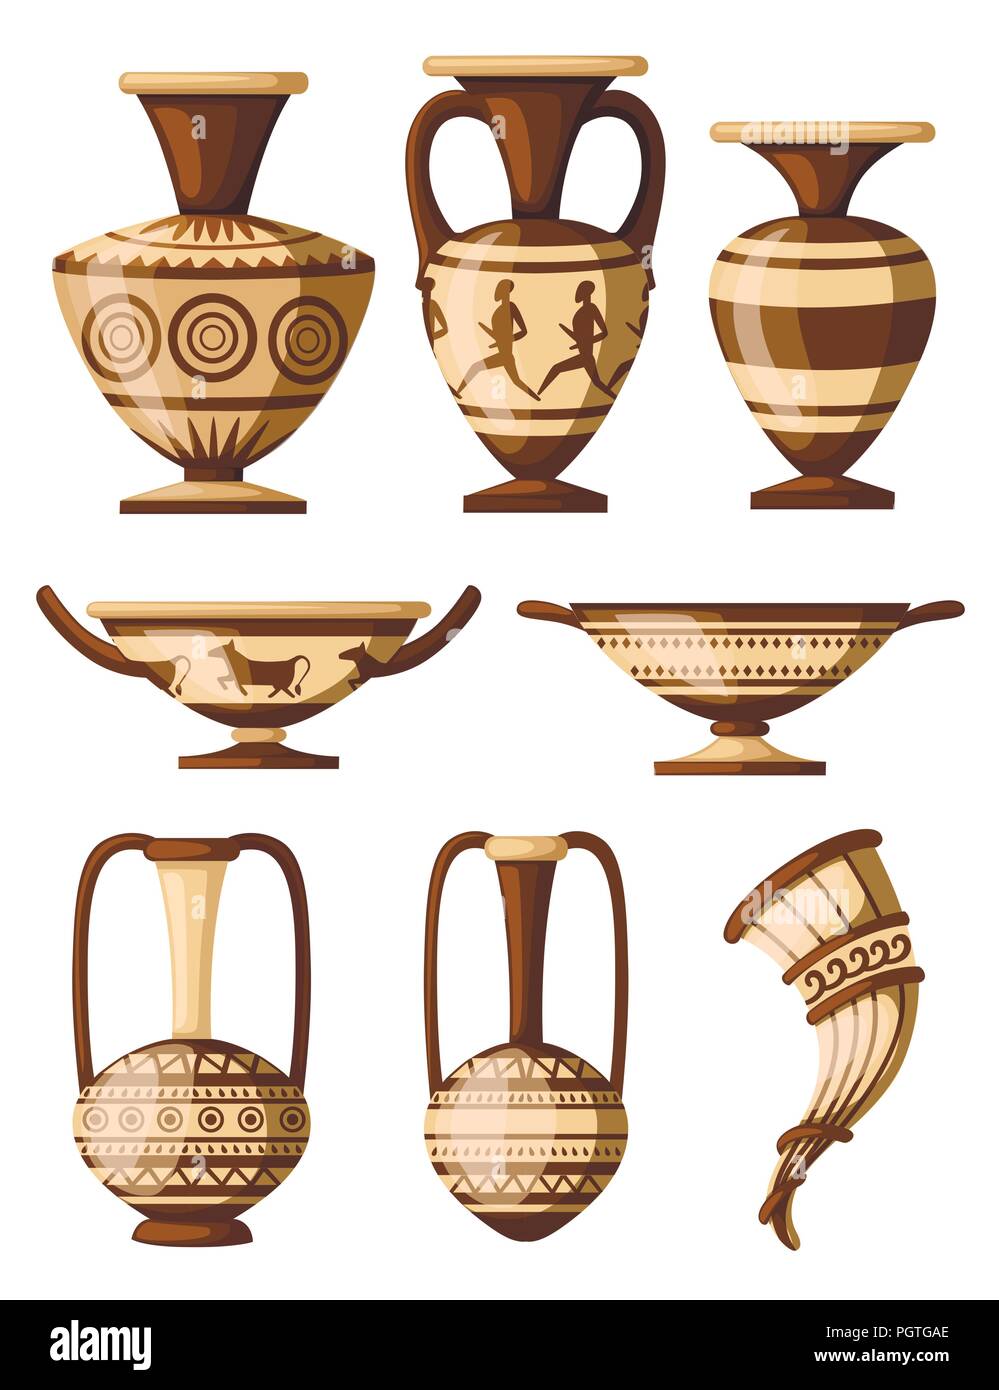 Greek pottery icon collection. Amphora with patterns, rhyton, kylix. Greek or roman culture. Brown color and patterns. Flat vector illustration isolat Stock Vector